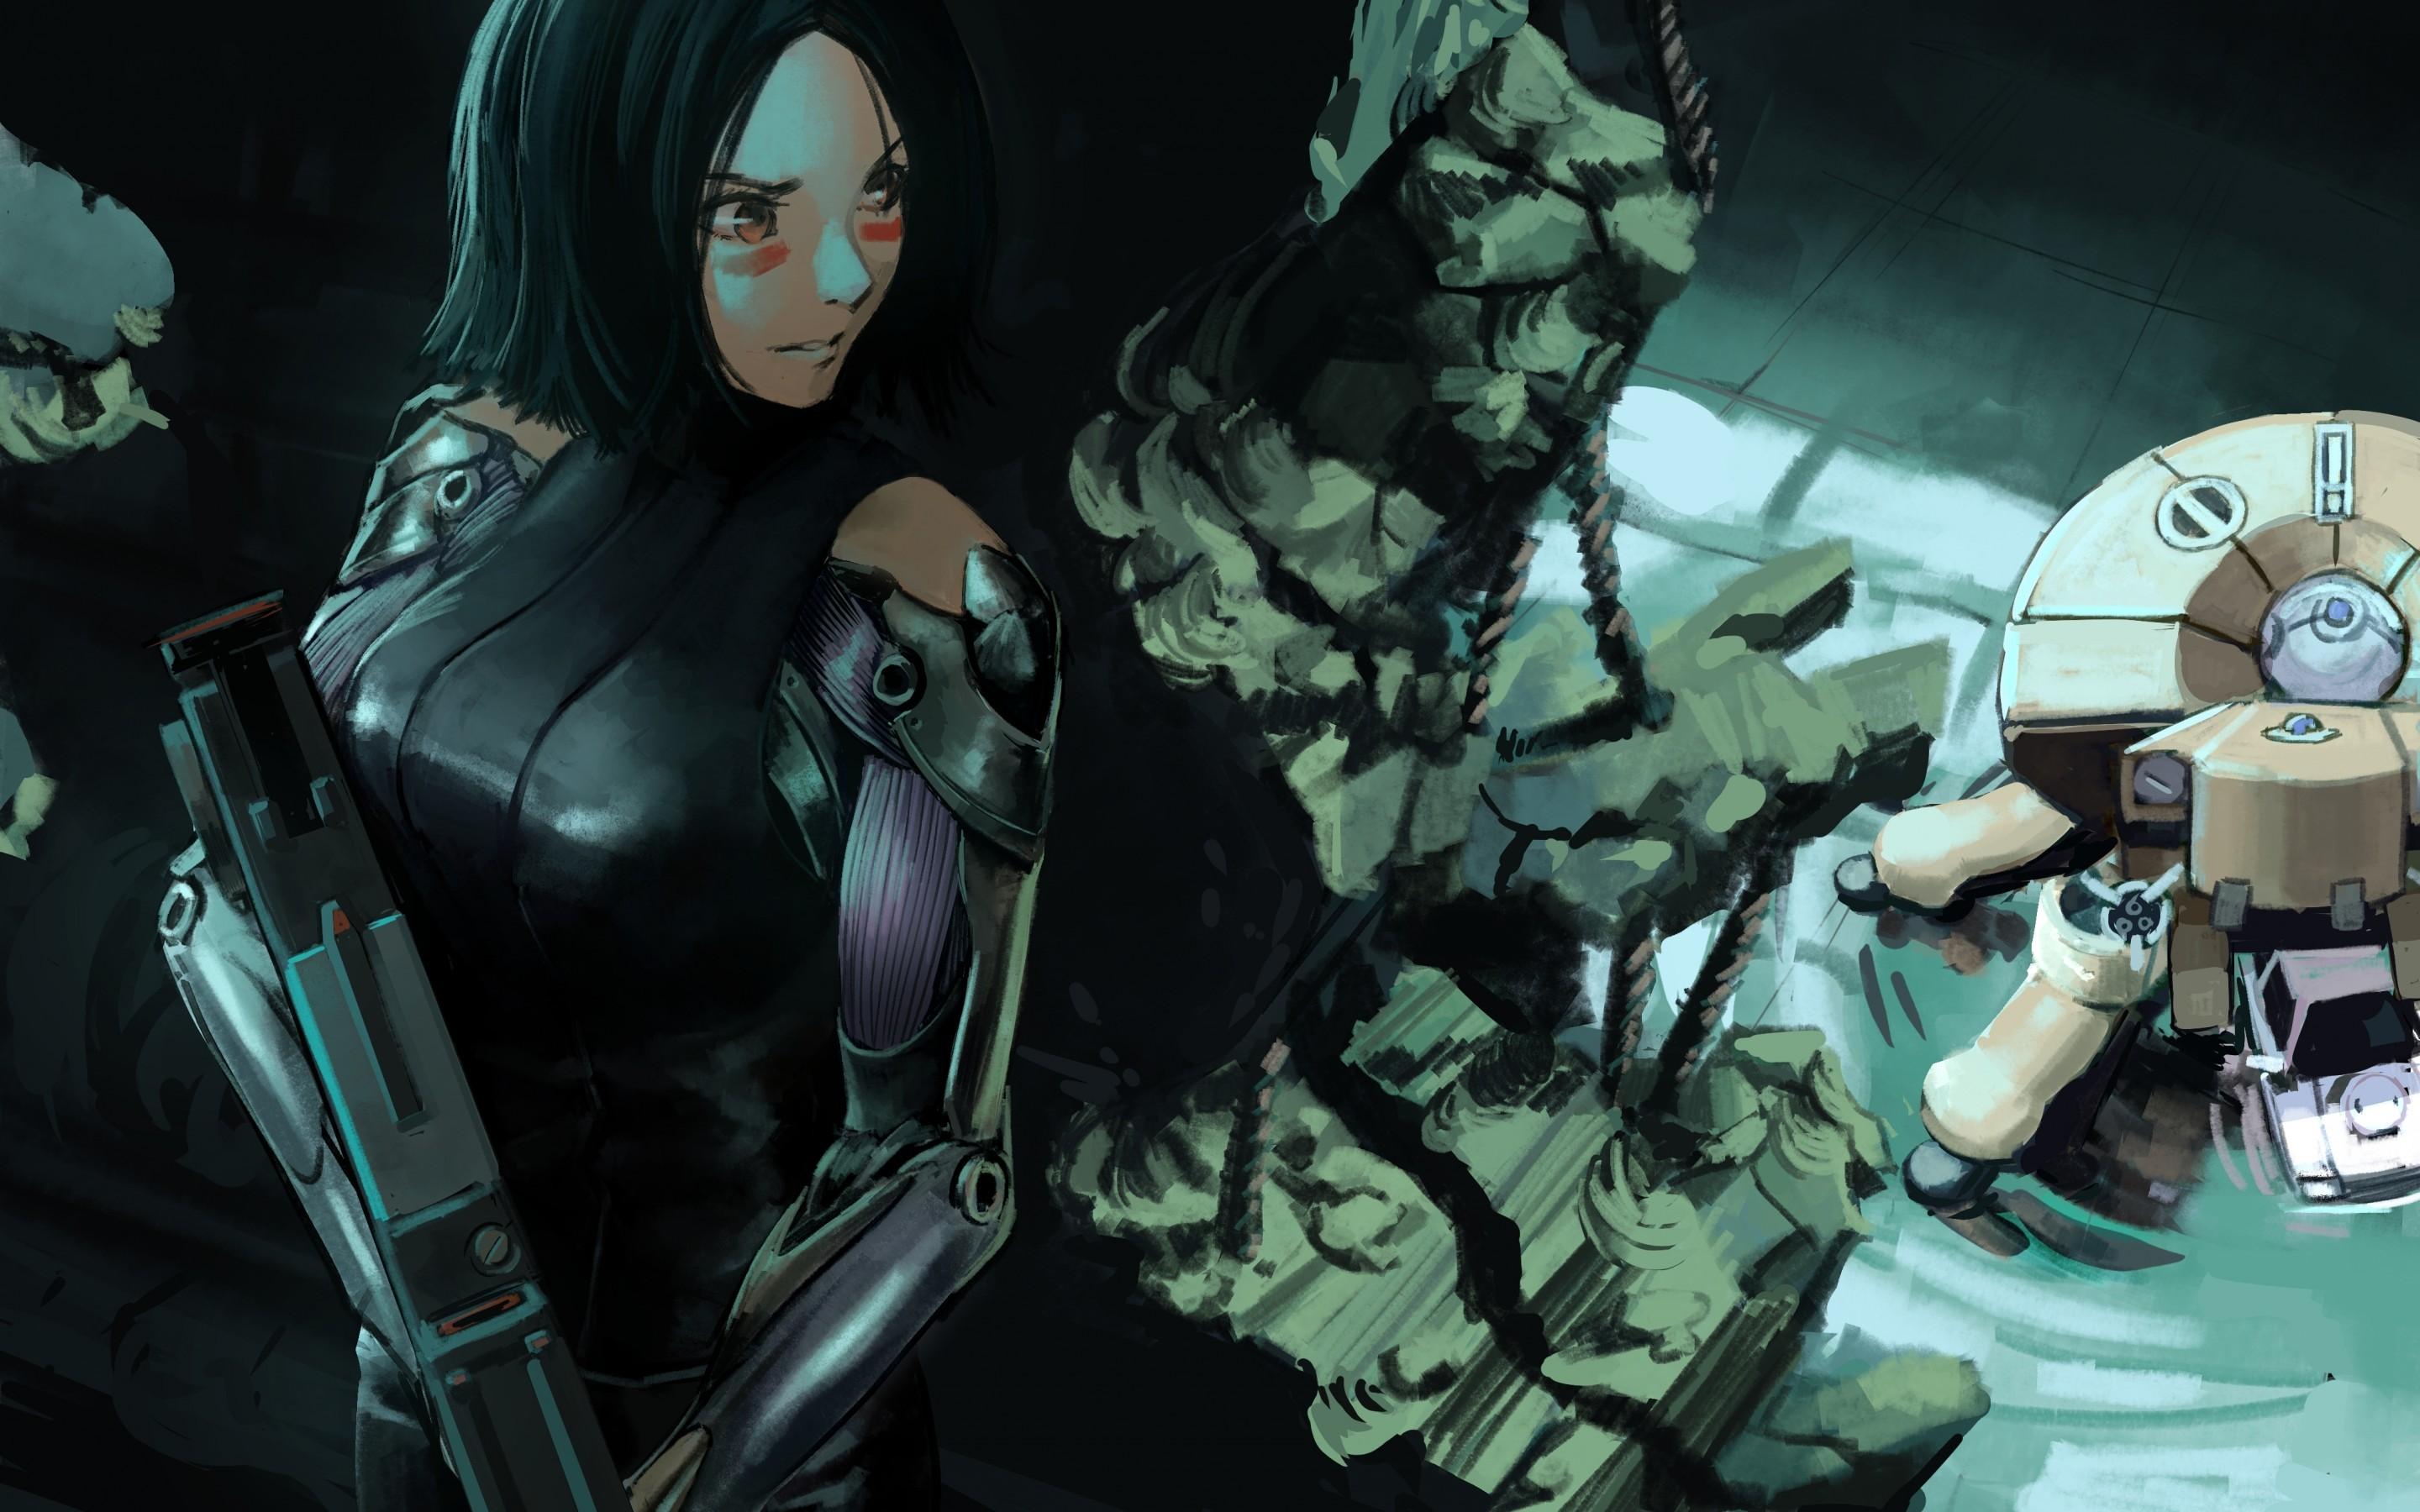 Download 2880x1800 Ghost In The Shell, Gally, Sci Fi Anime